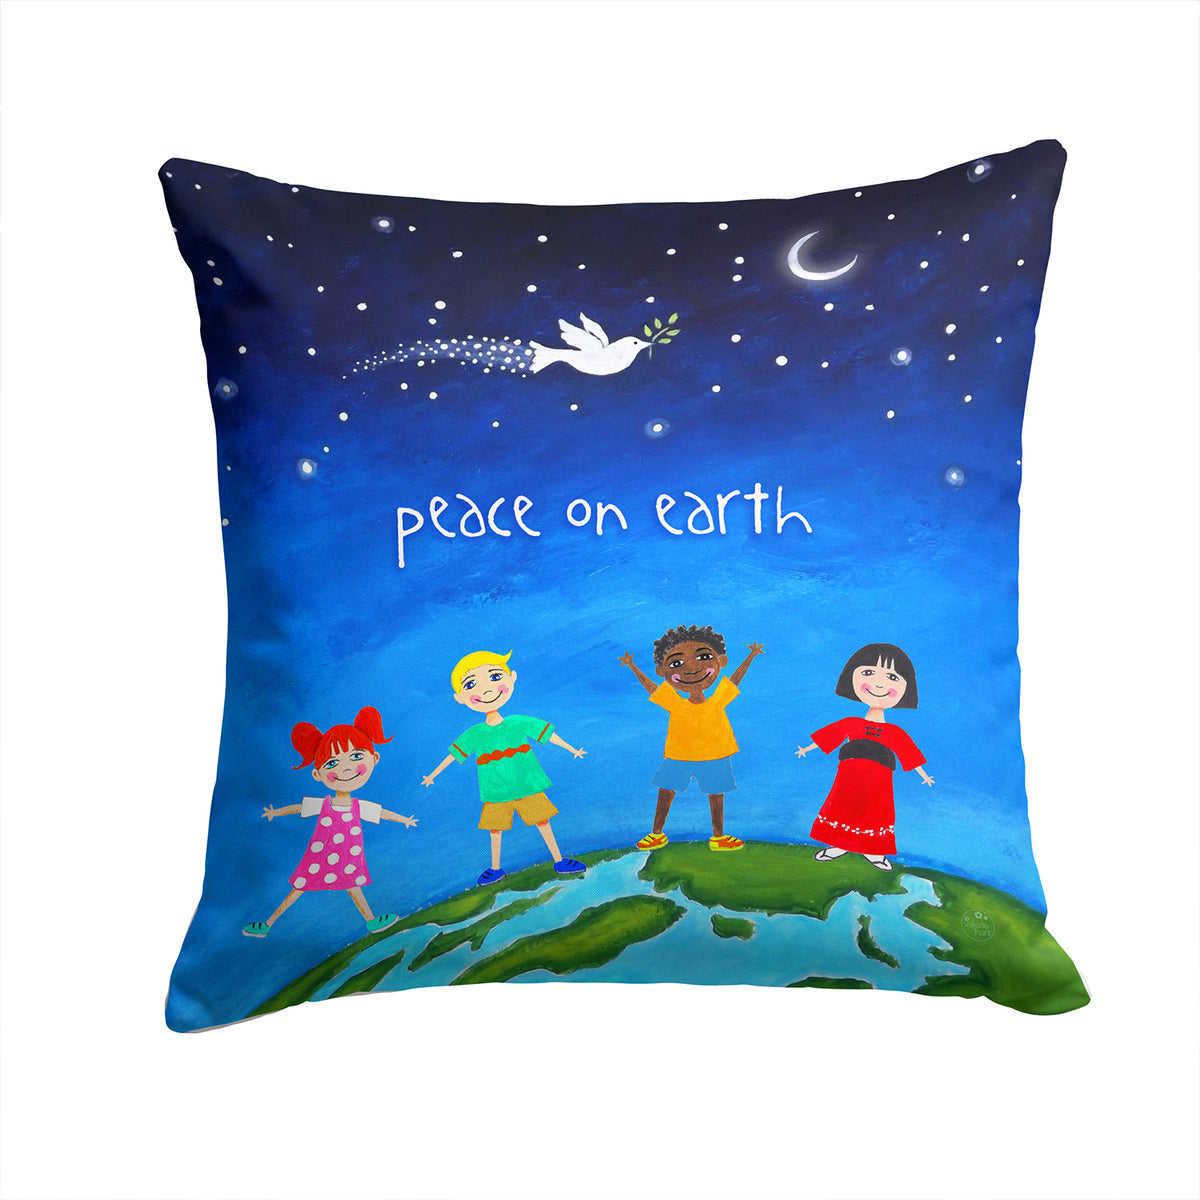 Peace on Earth Fabric Decorative Pillow VHA3039PW1414 - the-store.com